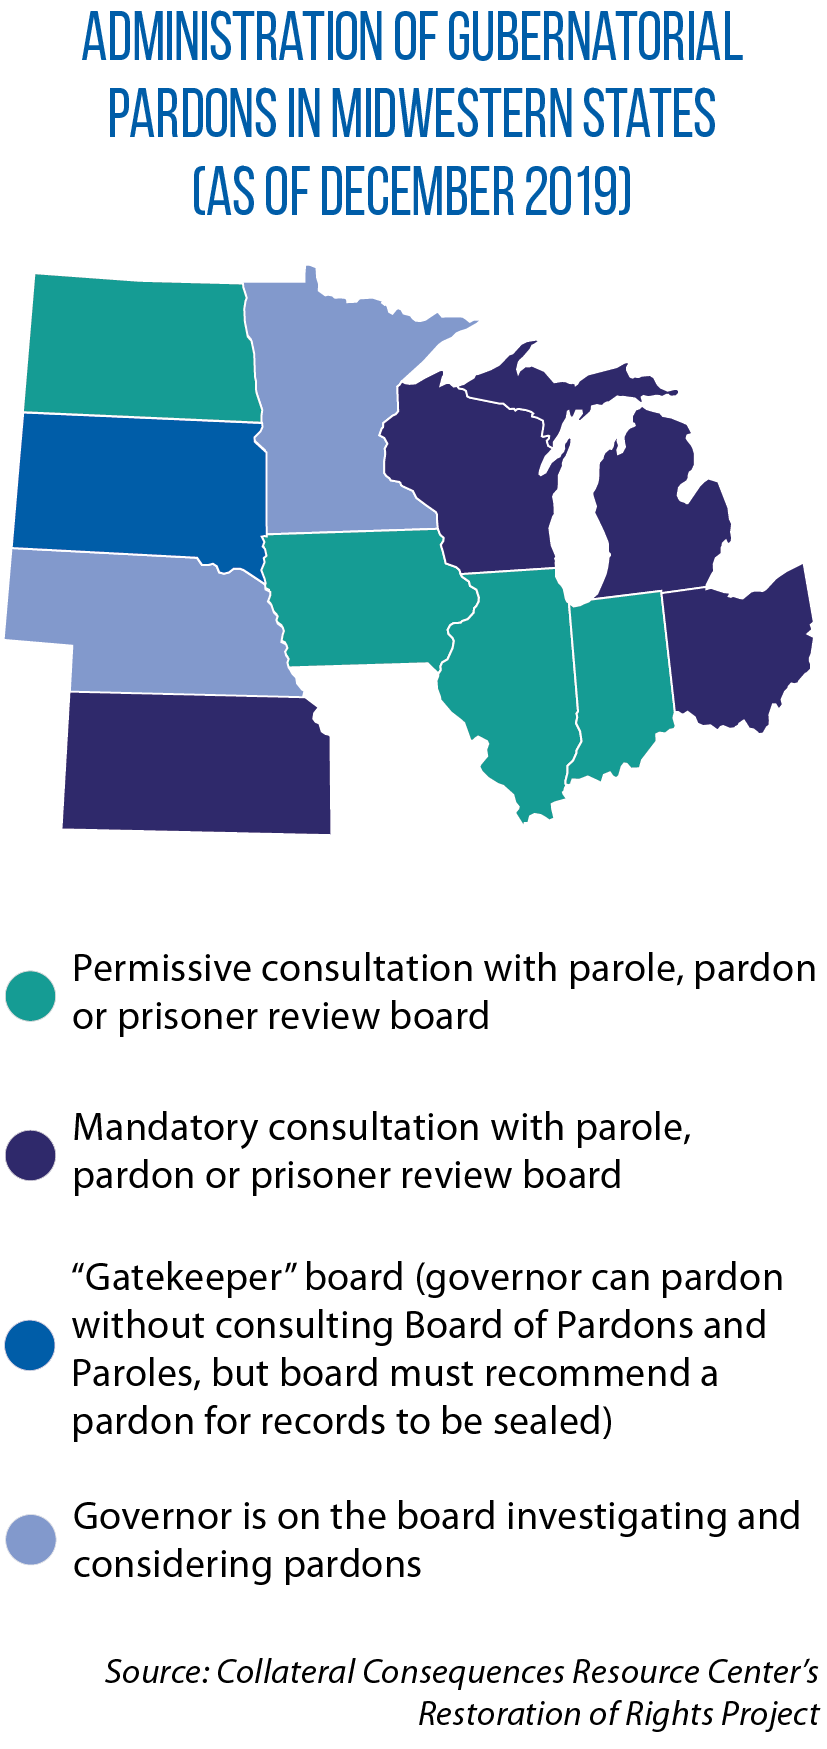 Map showing how gubernatorial pardons are administered in Midwestern states